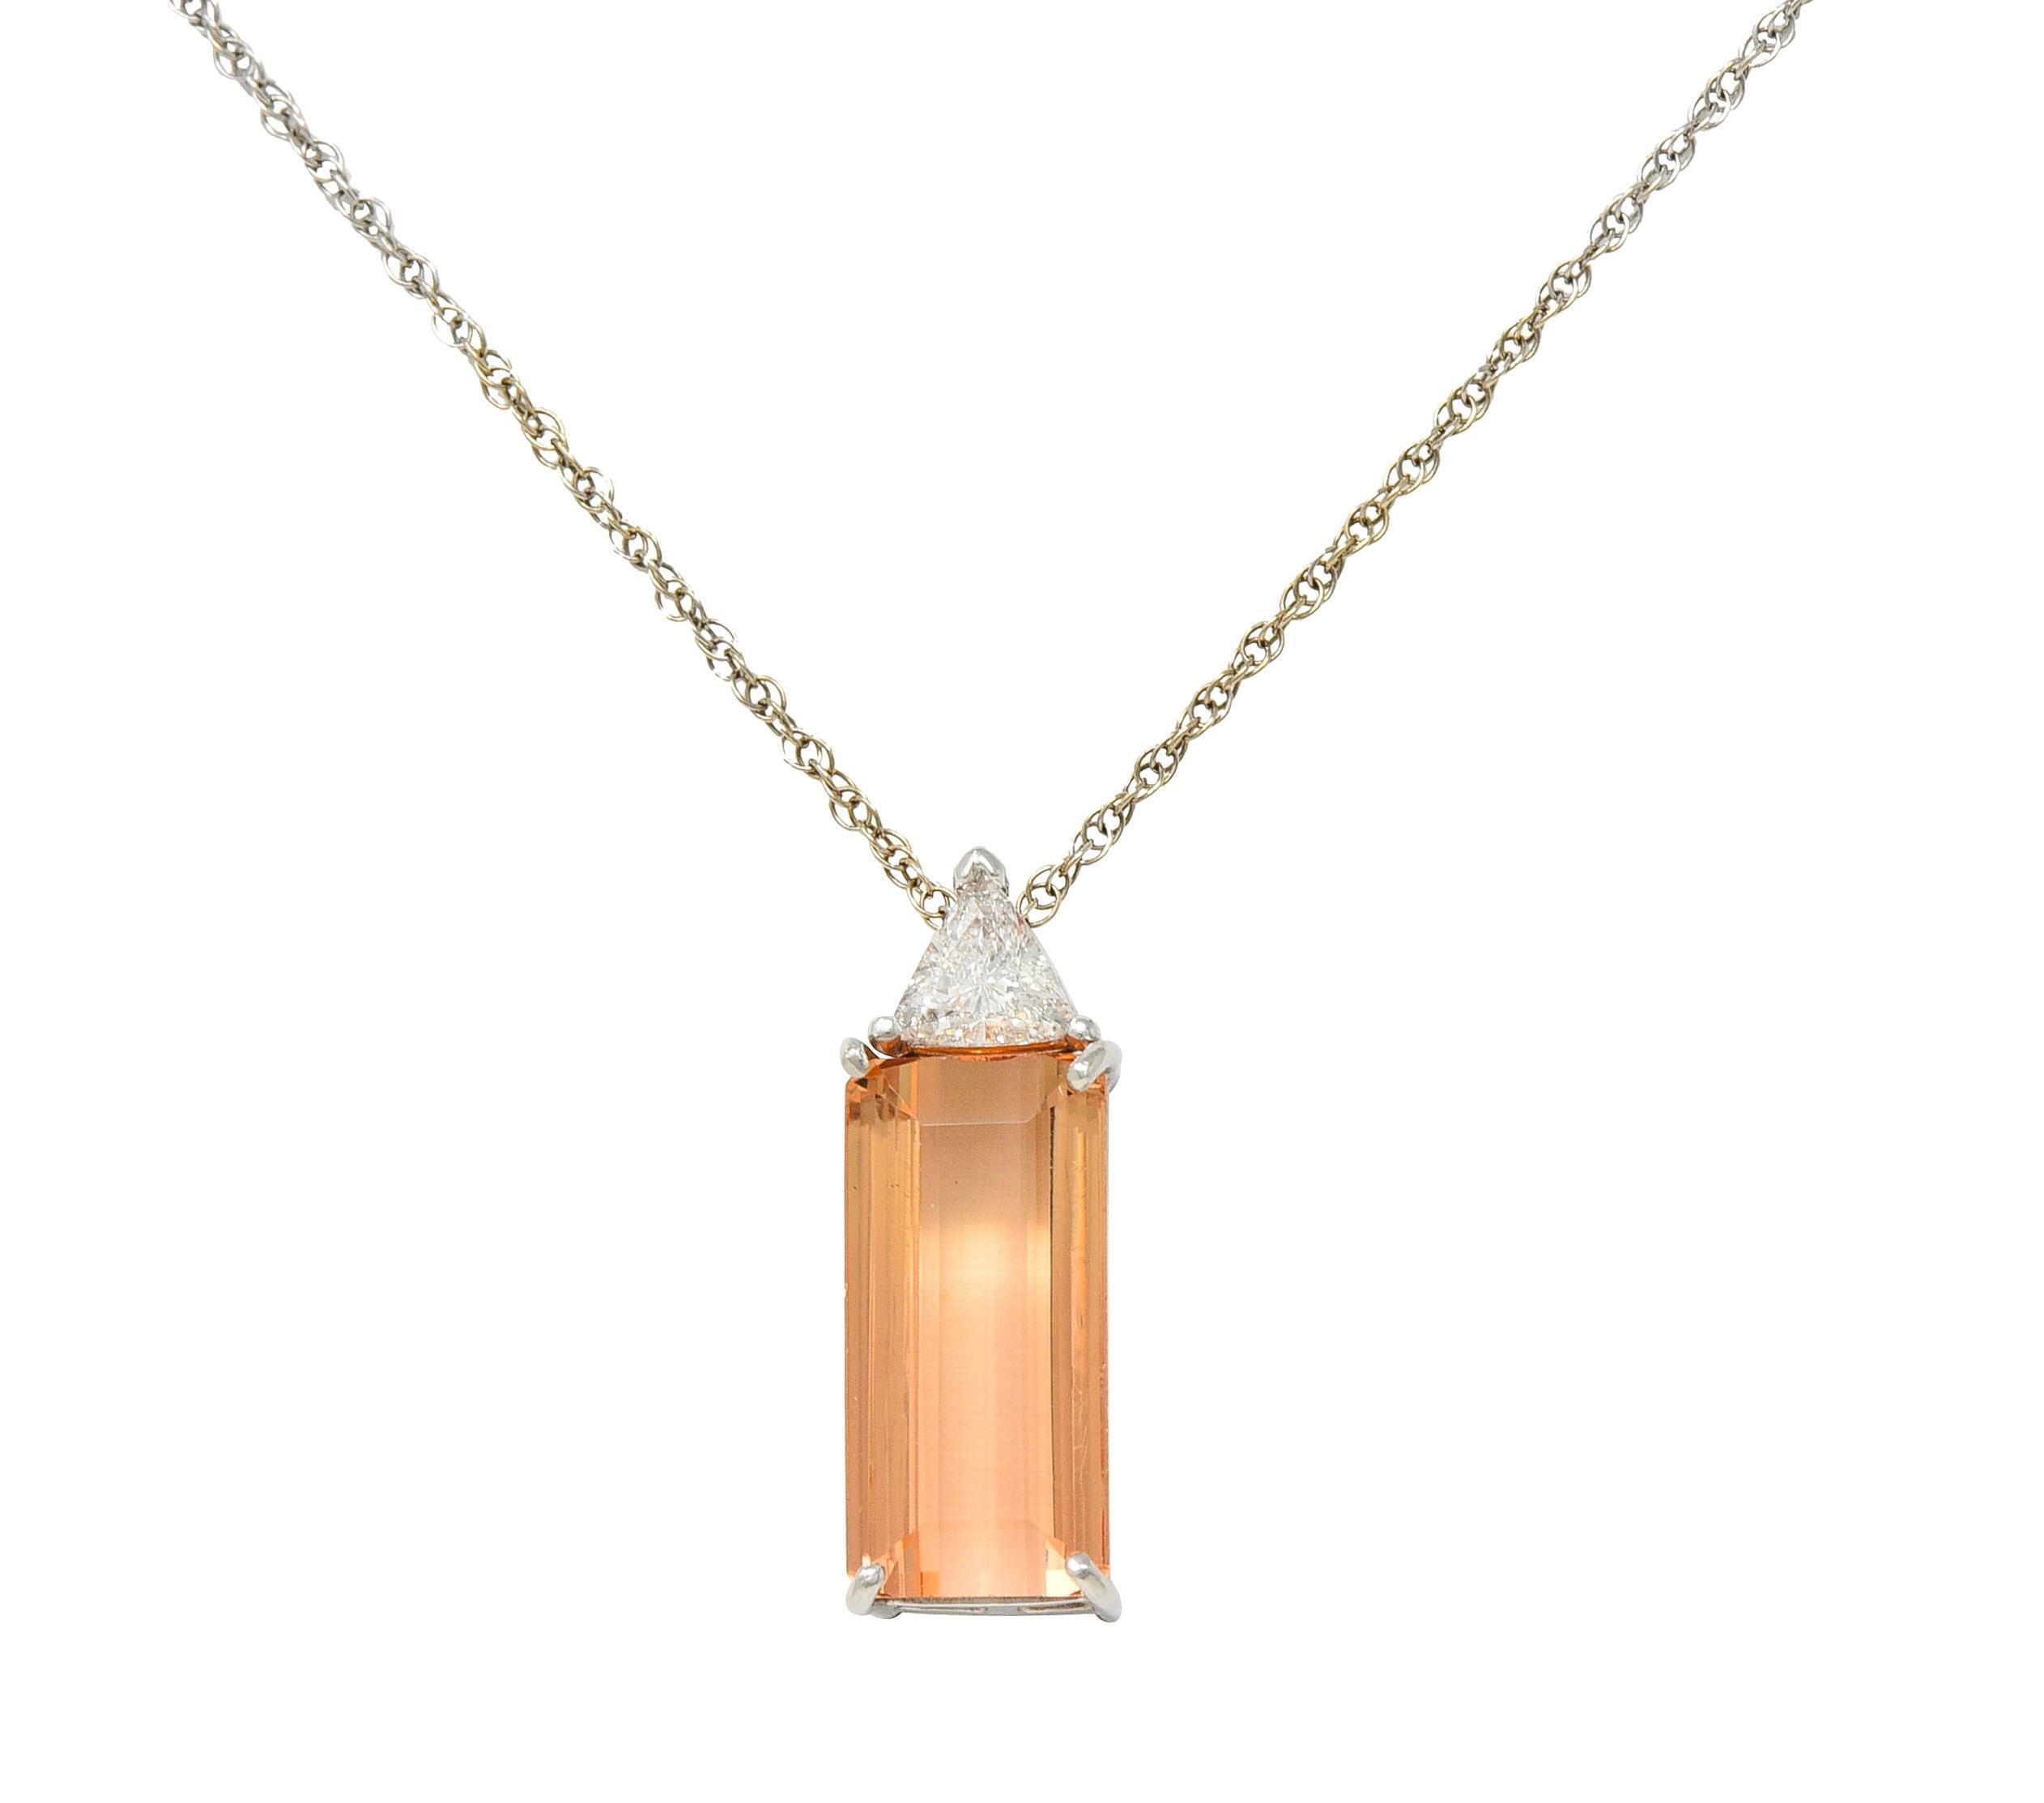 Comprised of a 1.5 mm white gold rope chain suspending a platinum pendant
Featuring a mixed emerald cut topaz weighing approximately 2.33 carats
Transparent light pinkish orange Imperial in color - prong set in basket
Accented by a trilliant cut